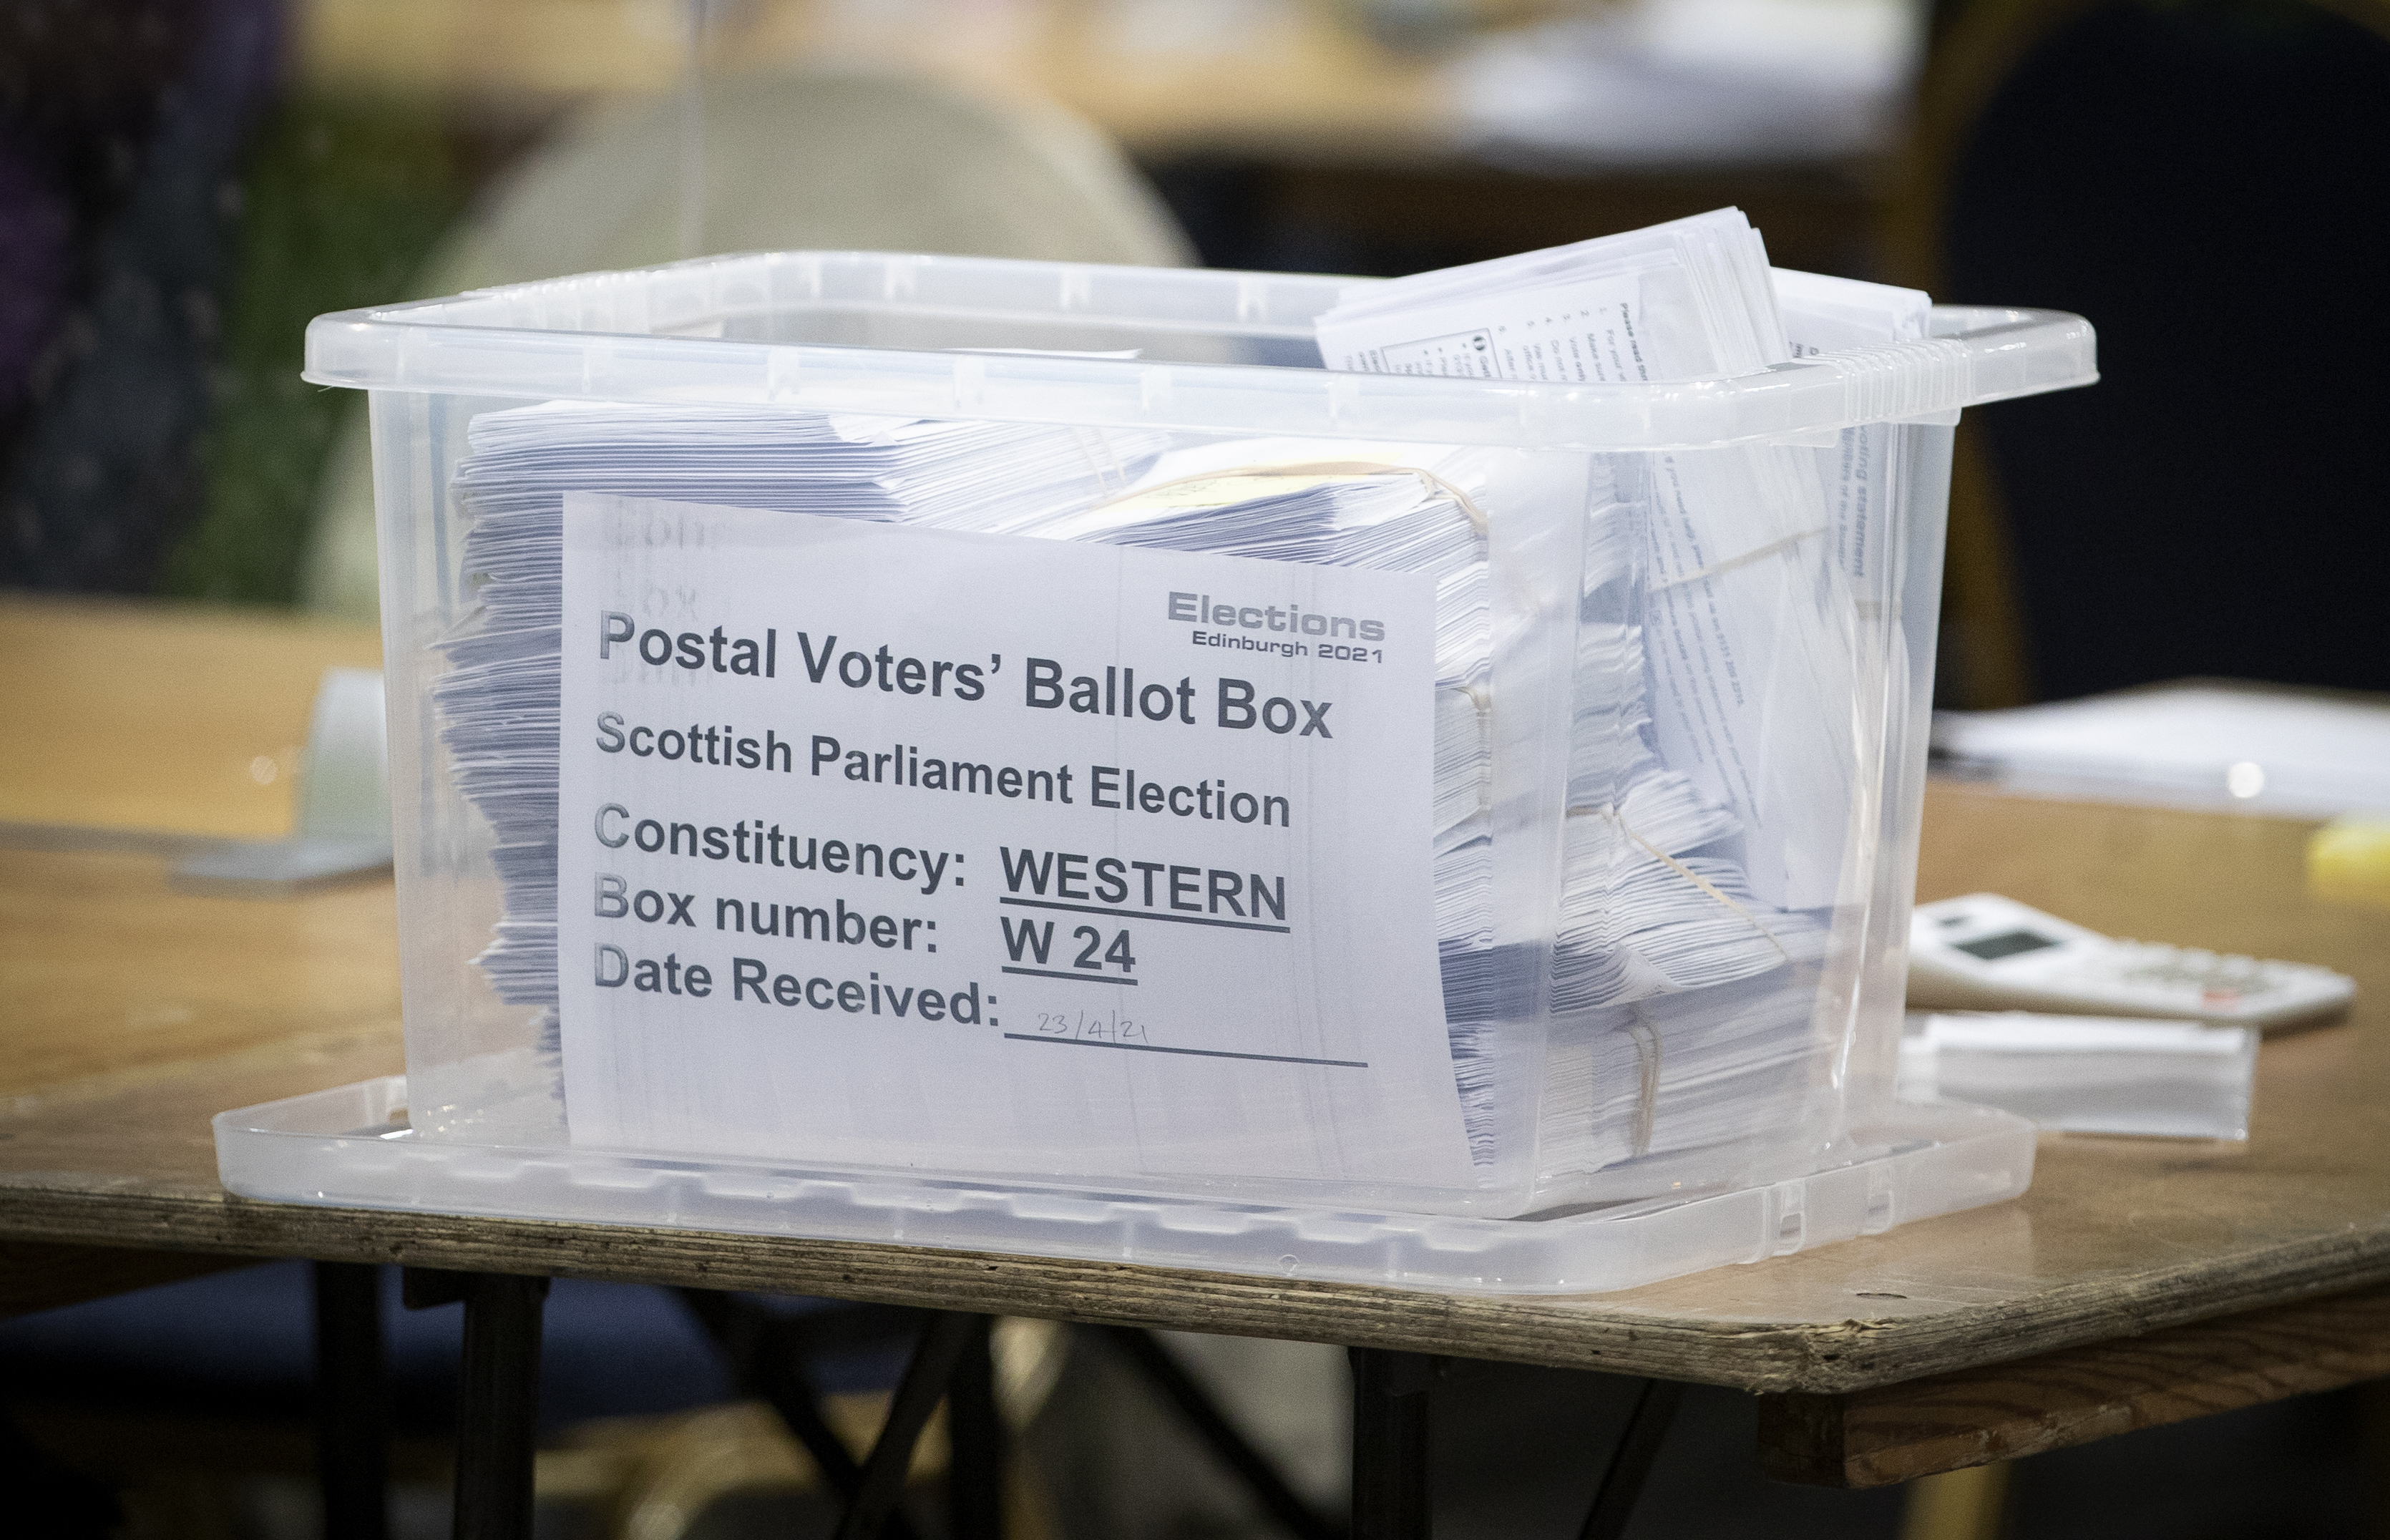 A large plastic box filled with ballot papers , with a label reading 'postal voters' ballot box' on the front